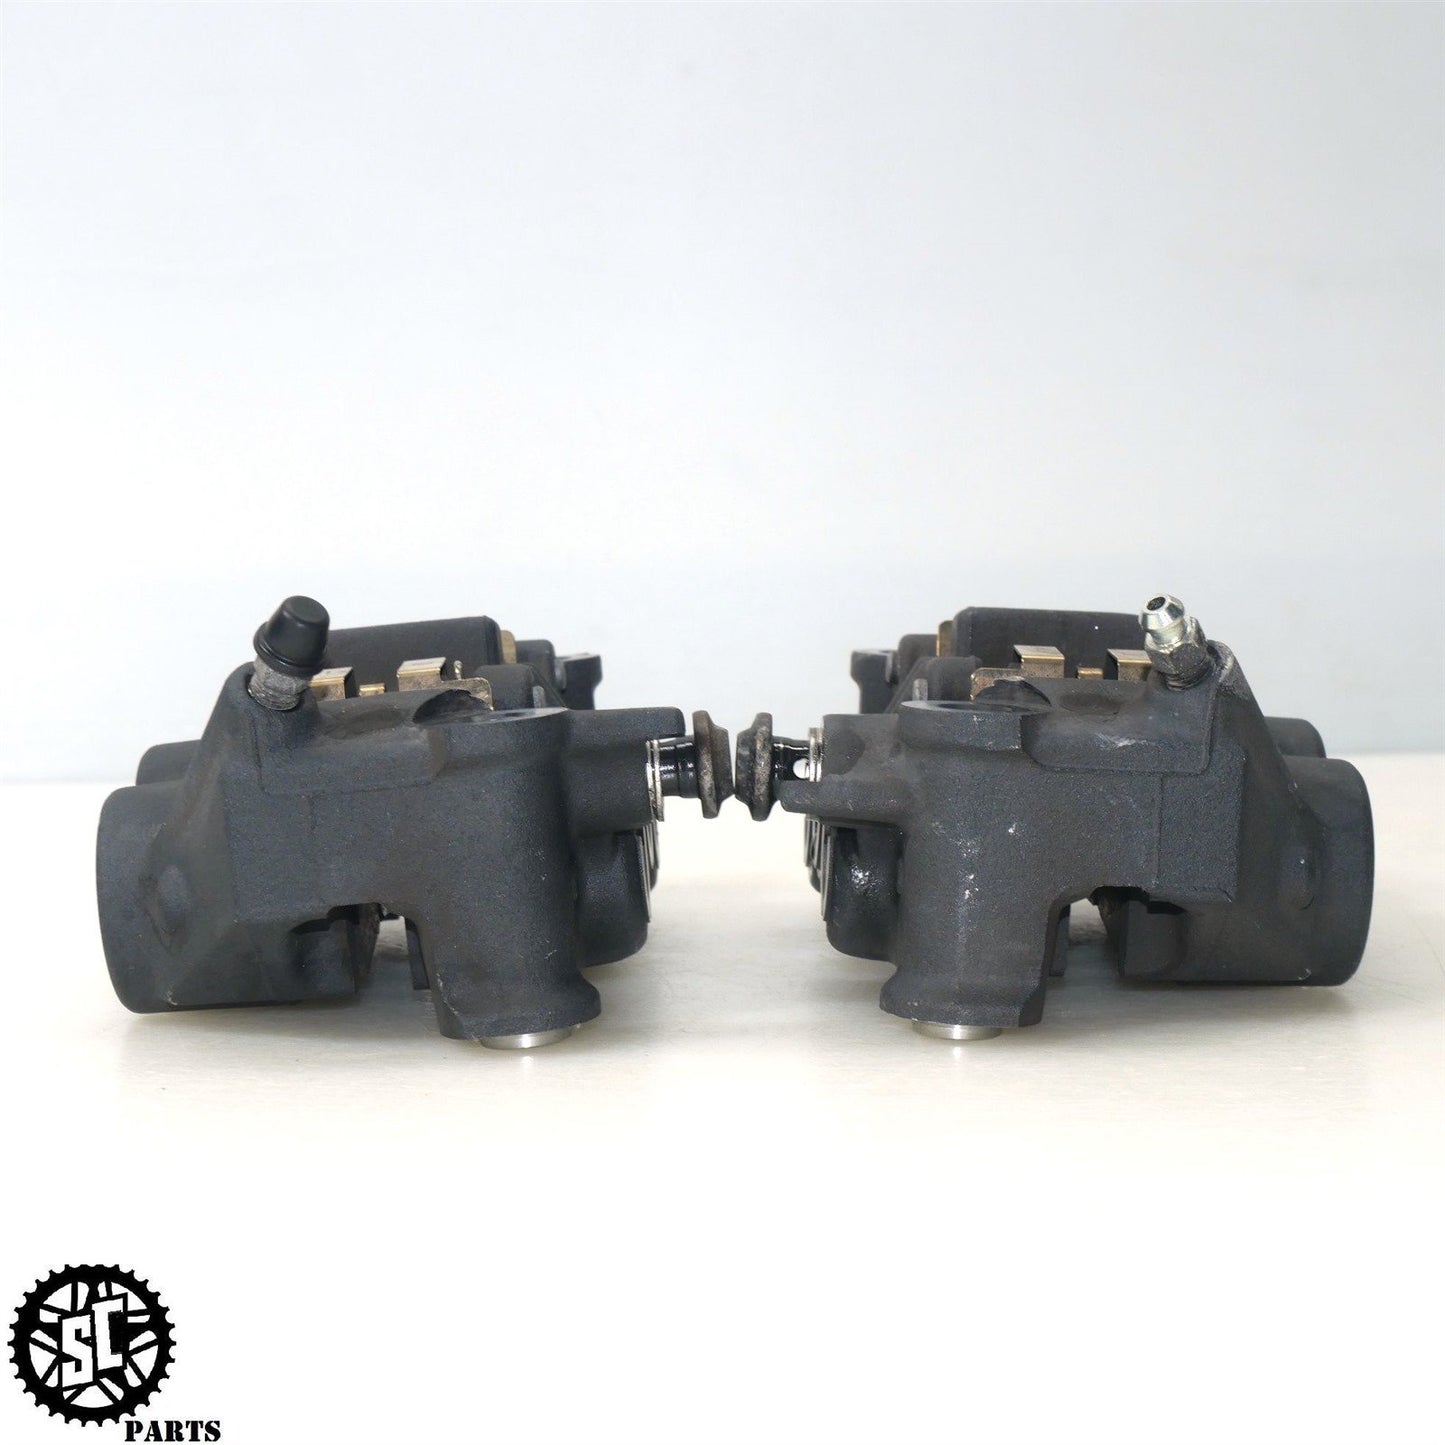 09-14 YAMAHA YZF R1 FRONT BRAKE CALIPERS Y39